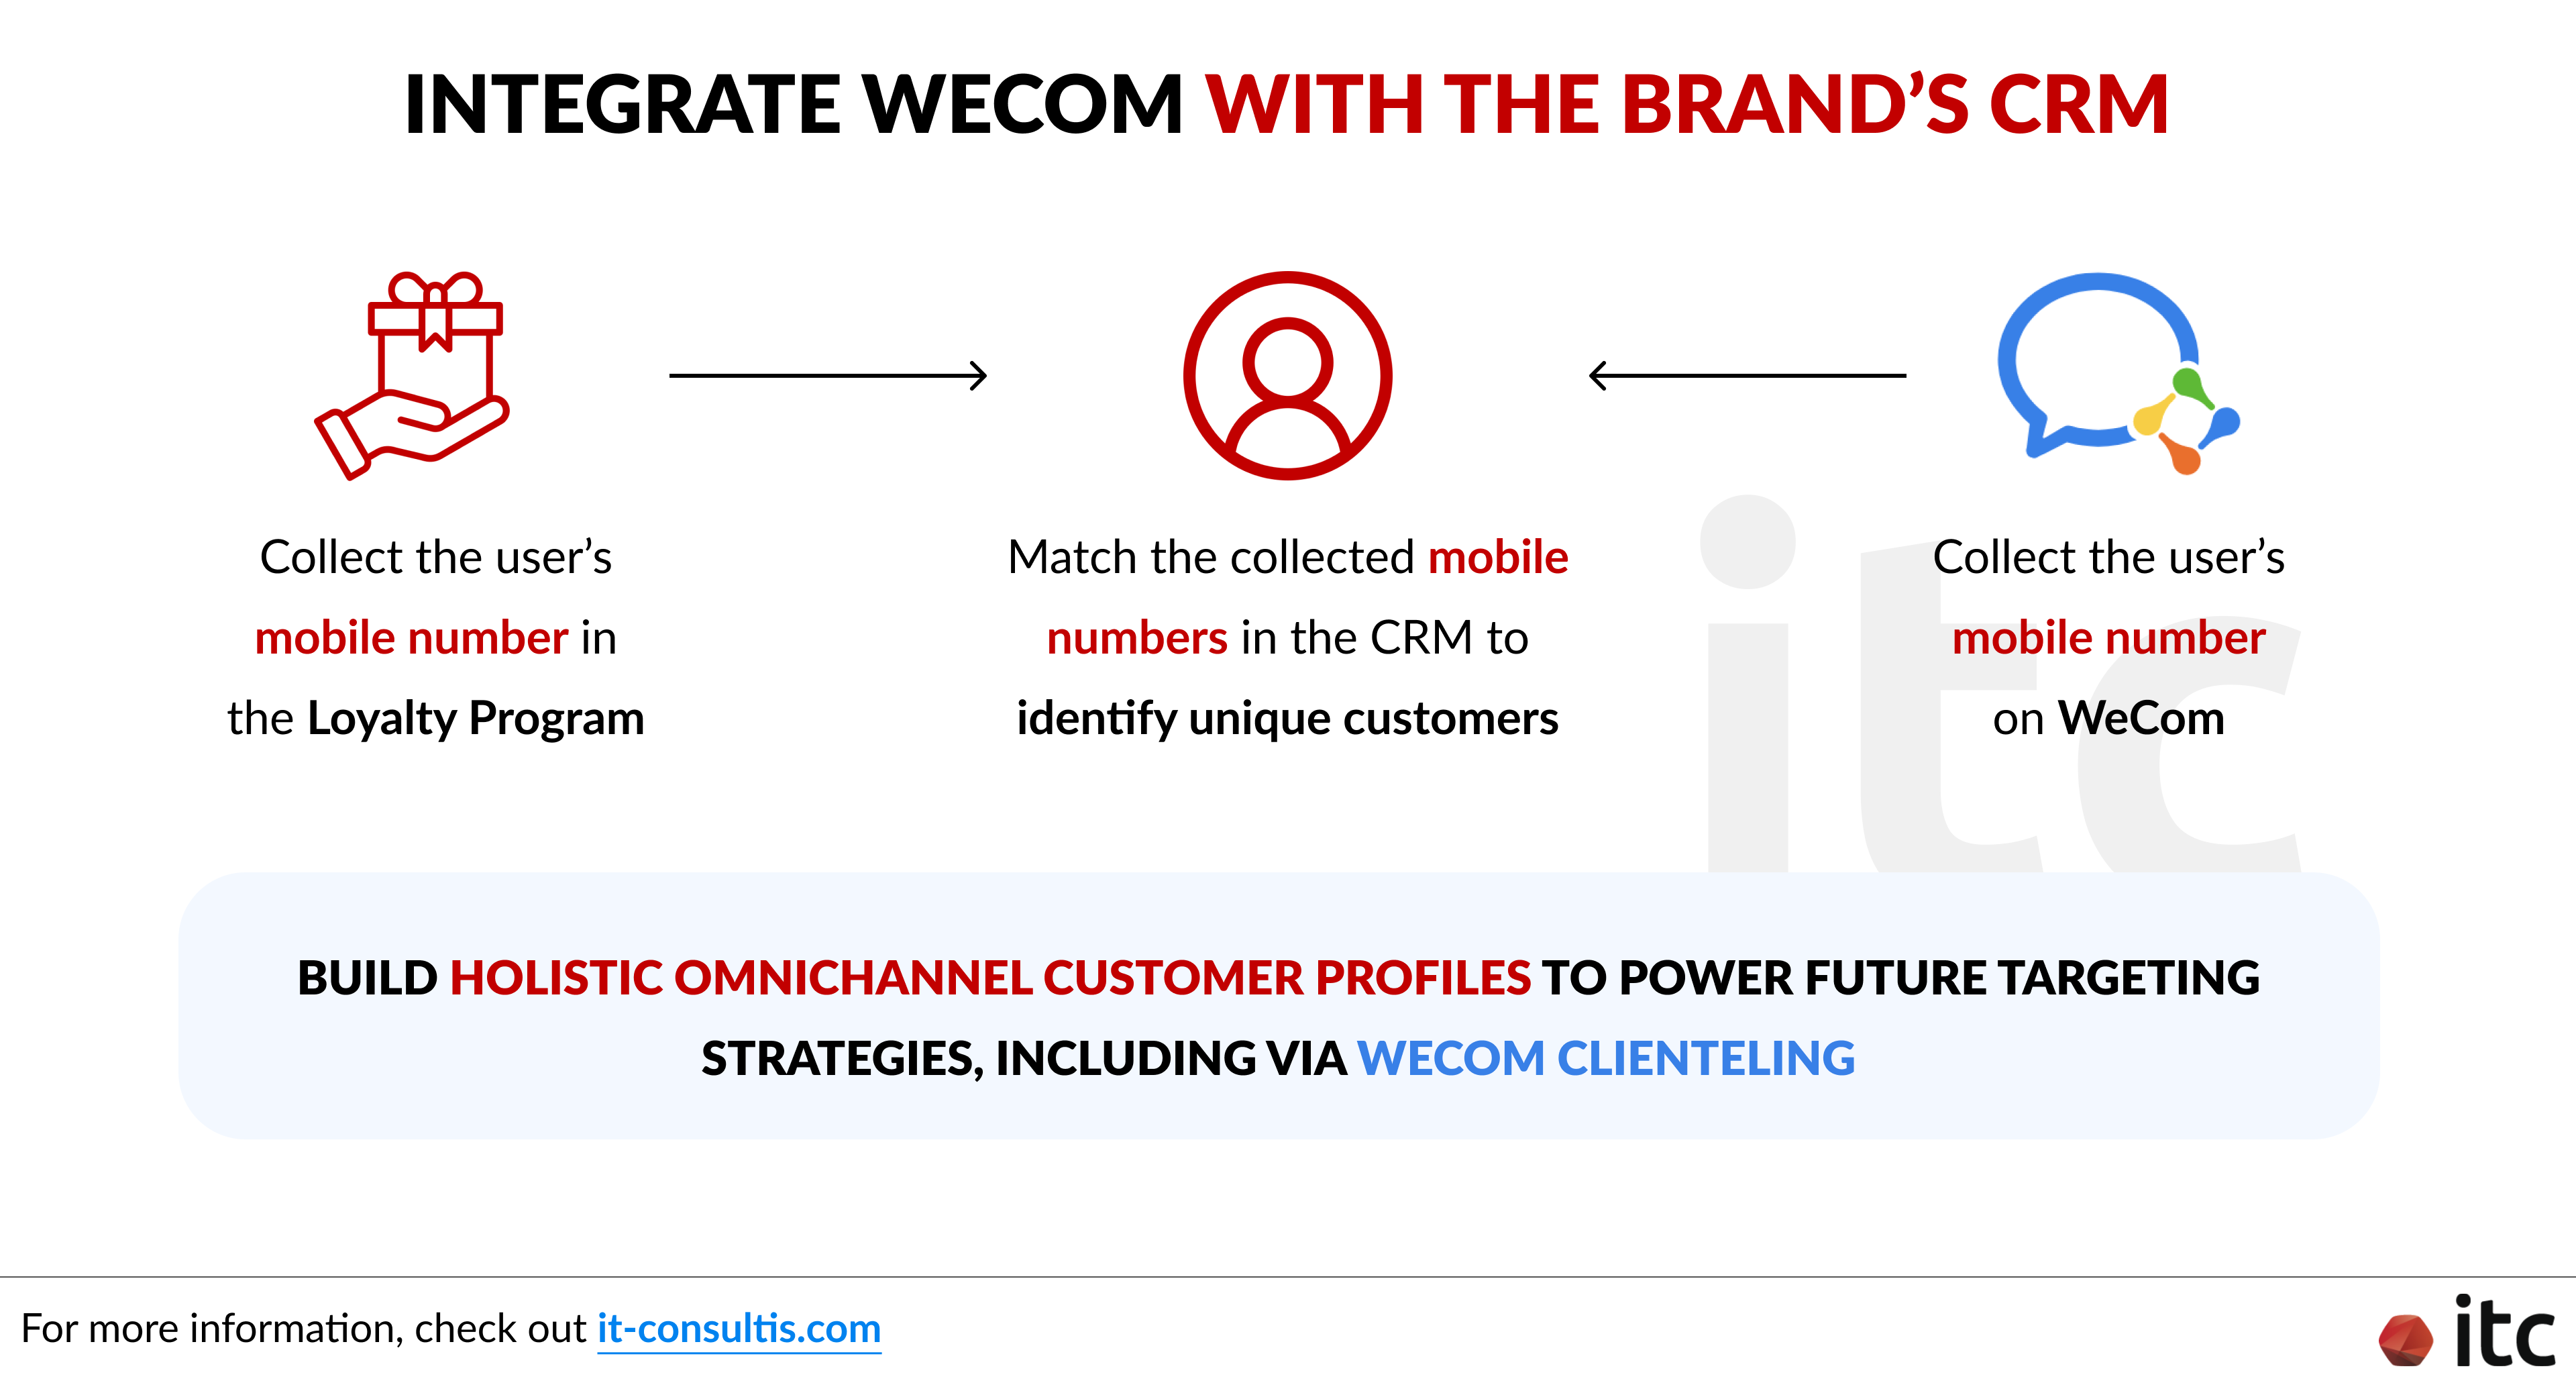 Brands can integrate WeCom with their brand's CRM and establish a unique identifier for each client to easily identify unique customers across different channels and effectively consolidate data